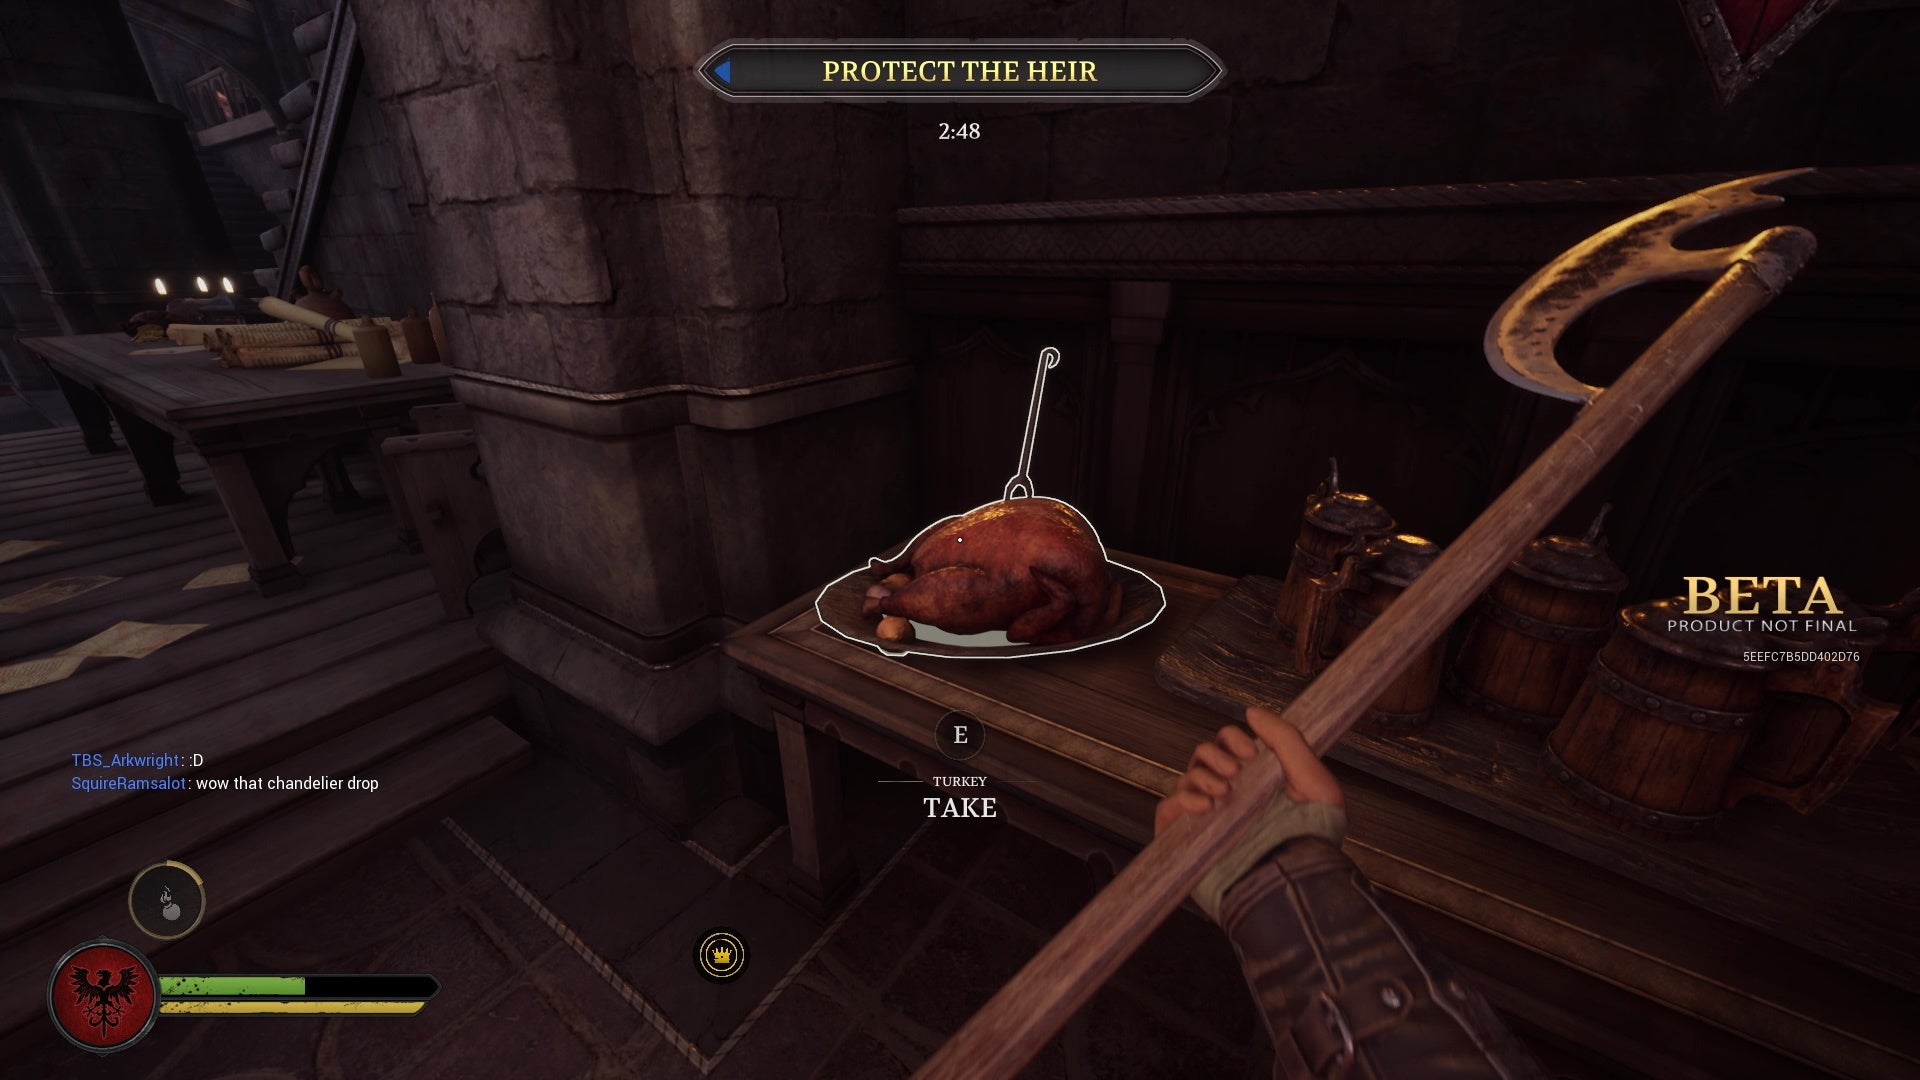 I stare at a roasted turkey in Chivalry 2, it looks tasty.